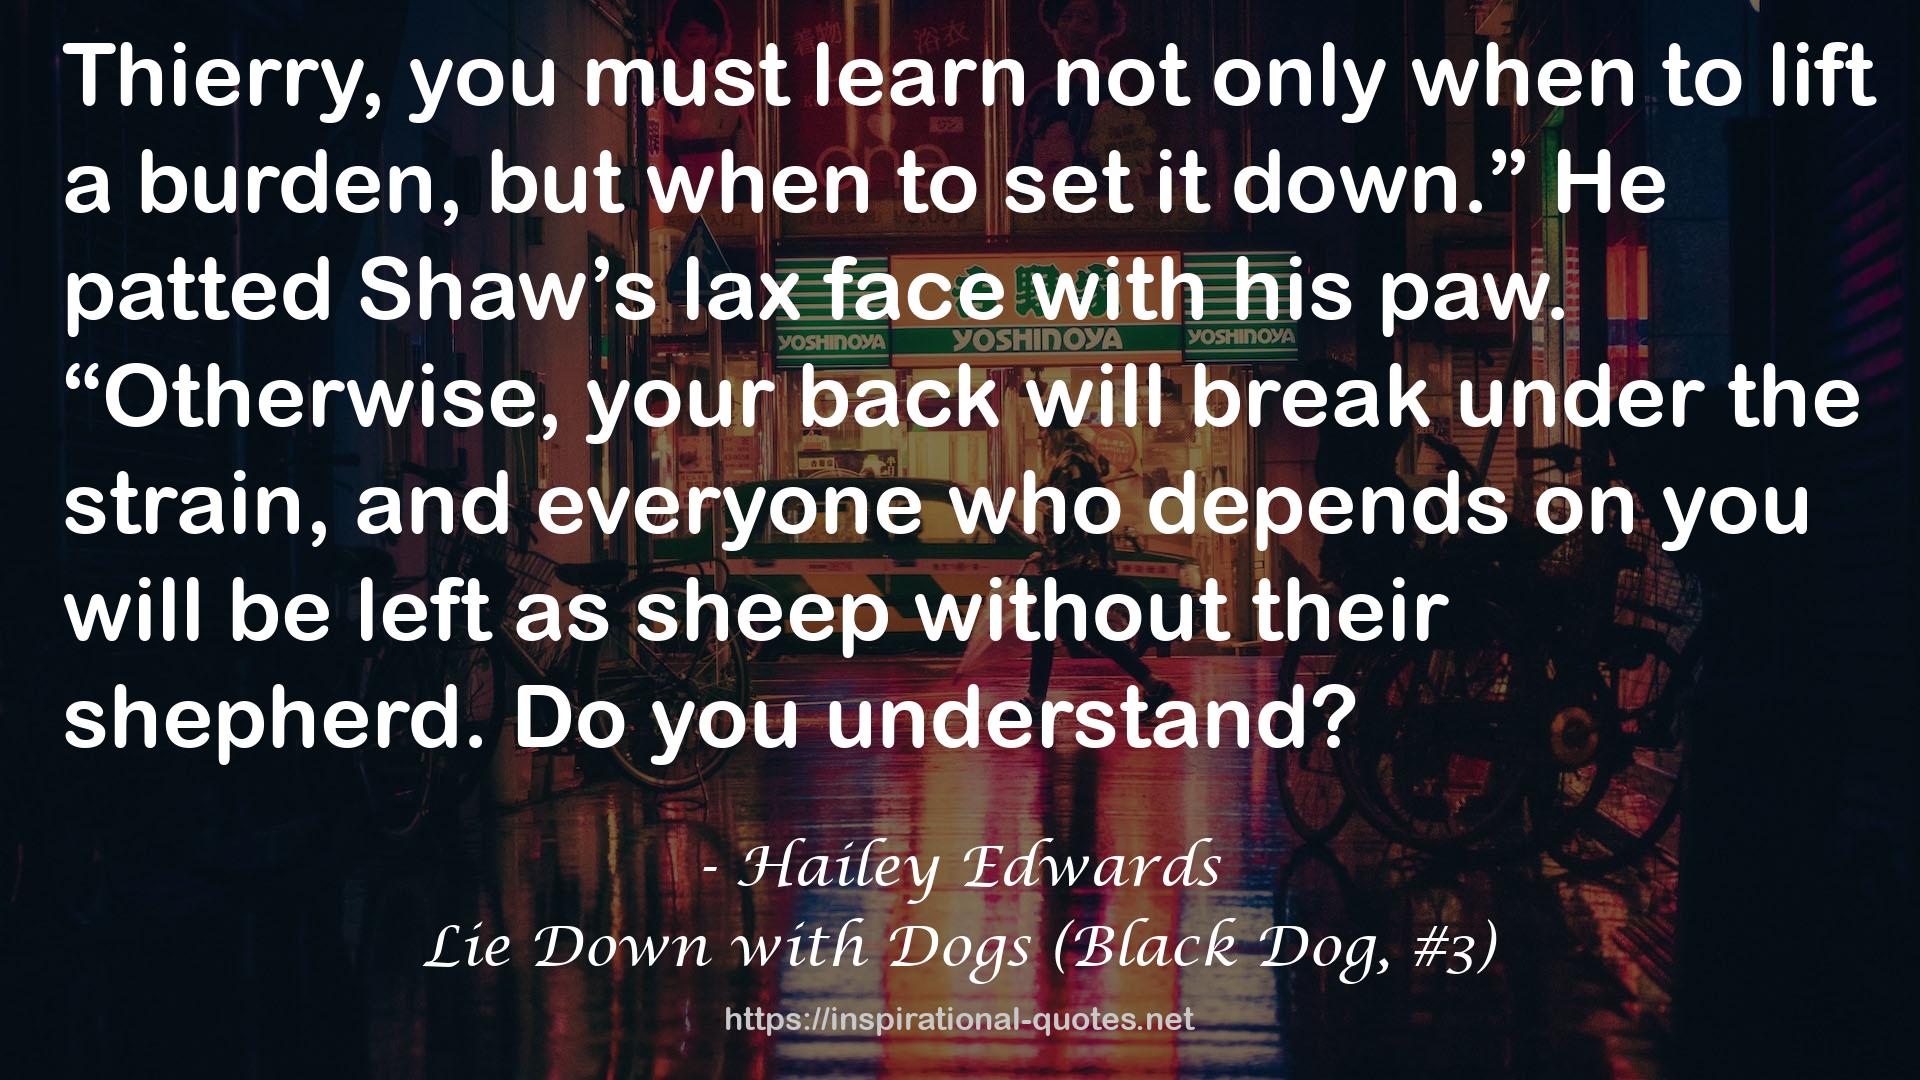 Lie Down with Dogs (Black Dog, #3) QUOTES